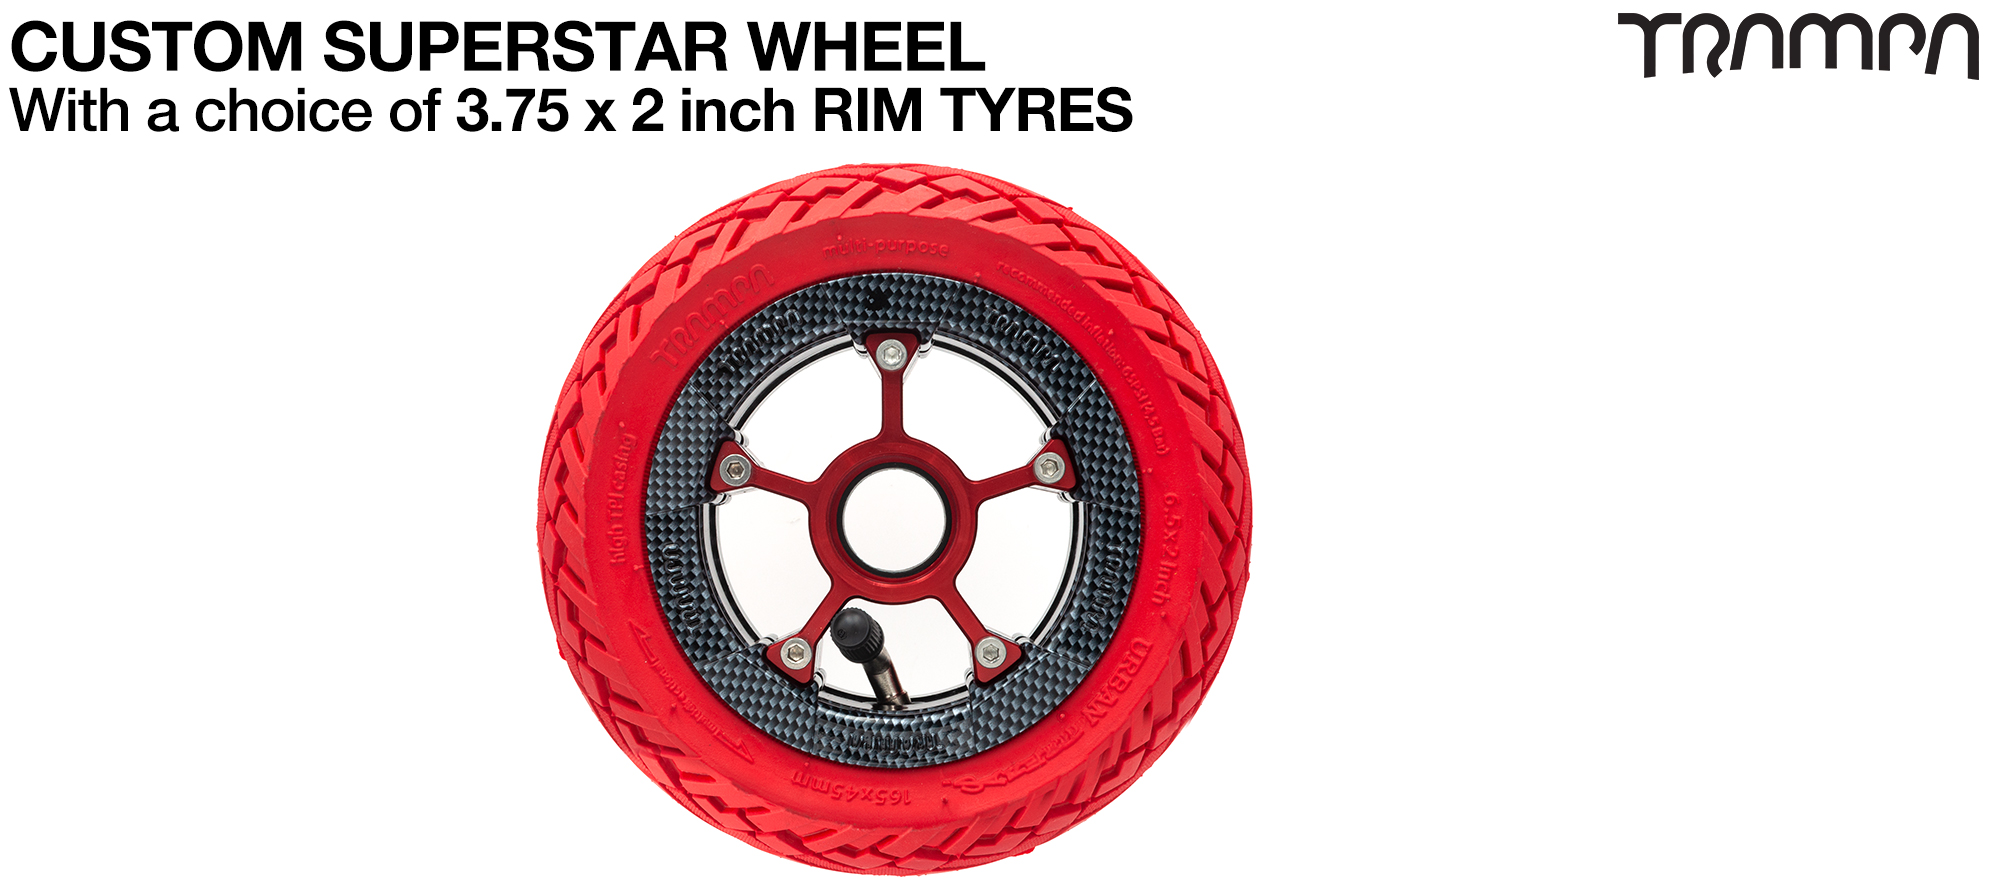 SUPERSTAR WHEEL showing with 6 Inch URBAN Tyre (£45)